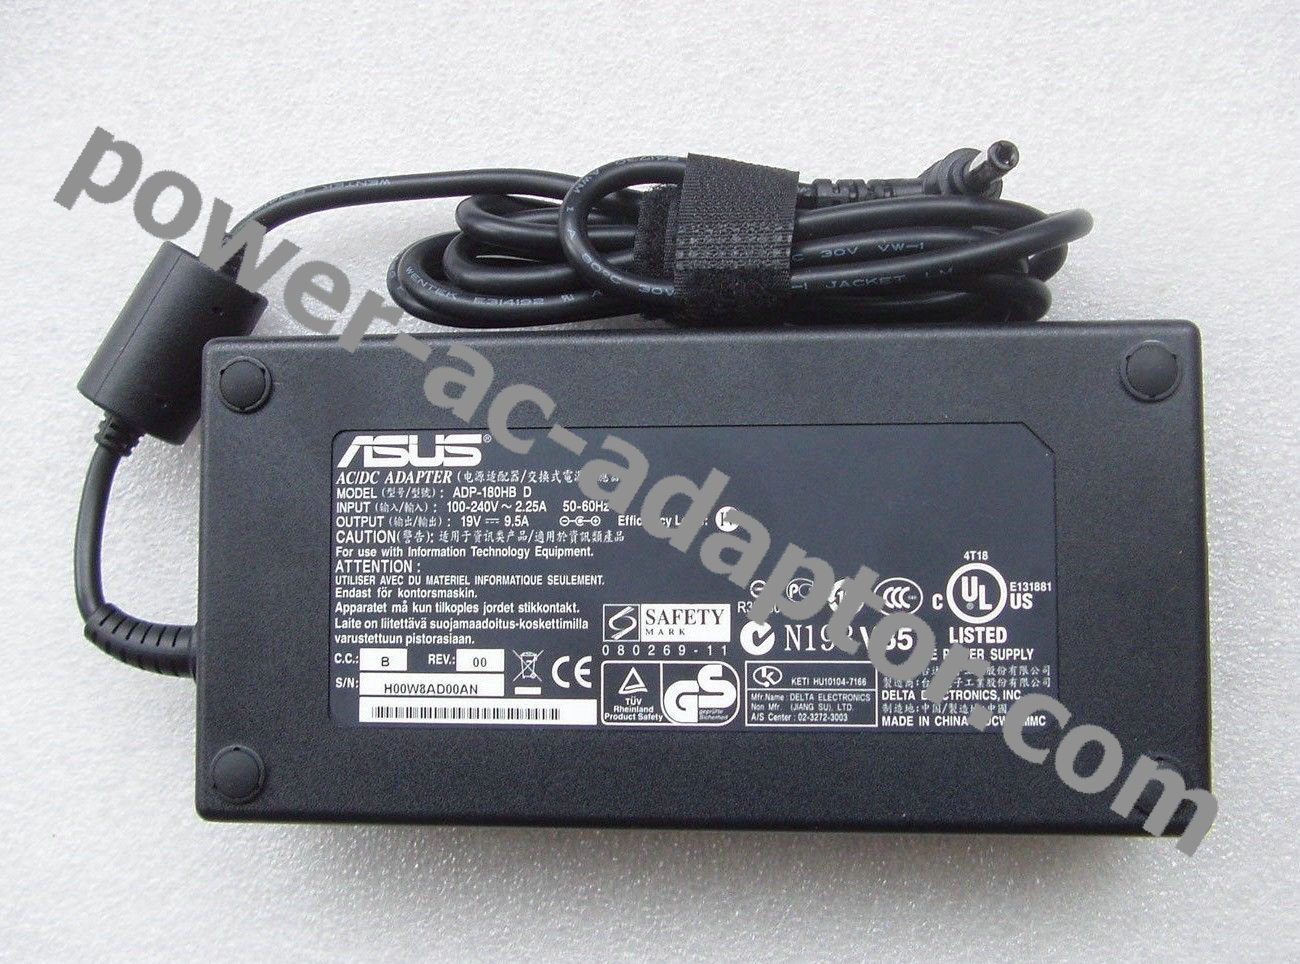 19V 9.5A 180W ASUS ADP-180HB D ADP-180EB D AC Adapter Charger